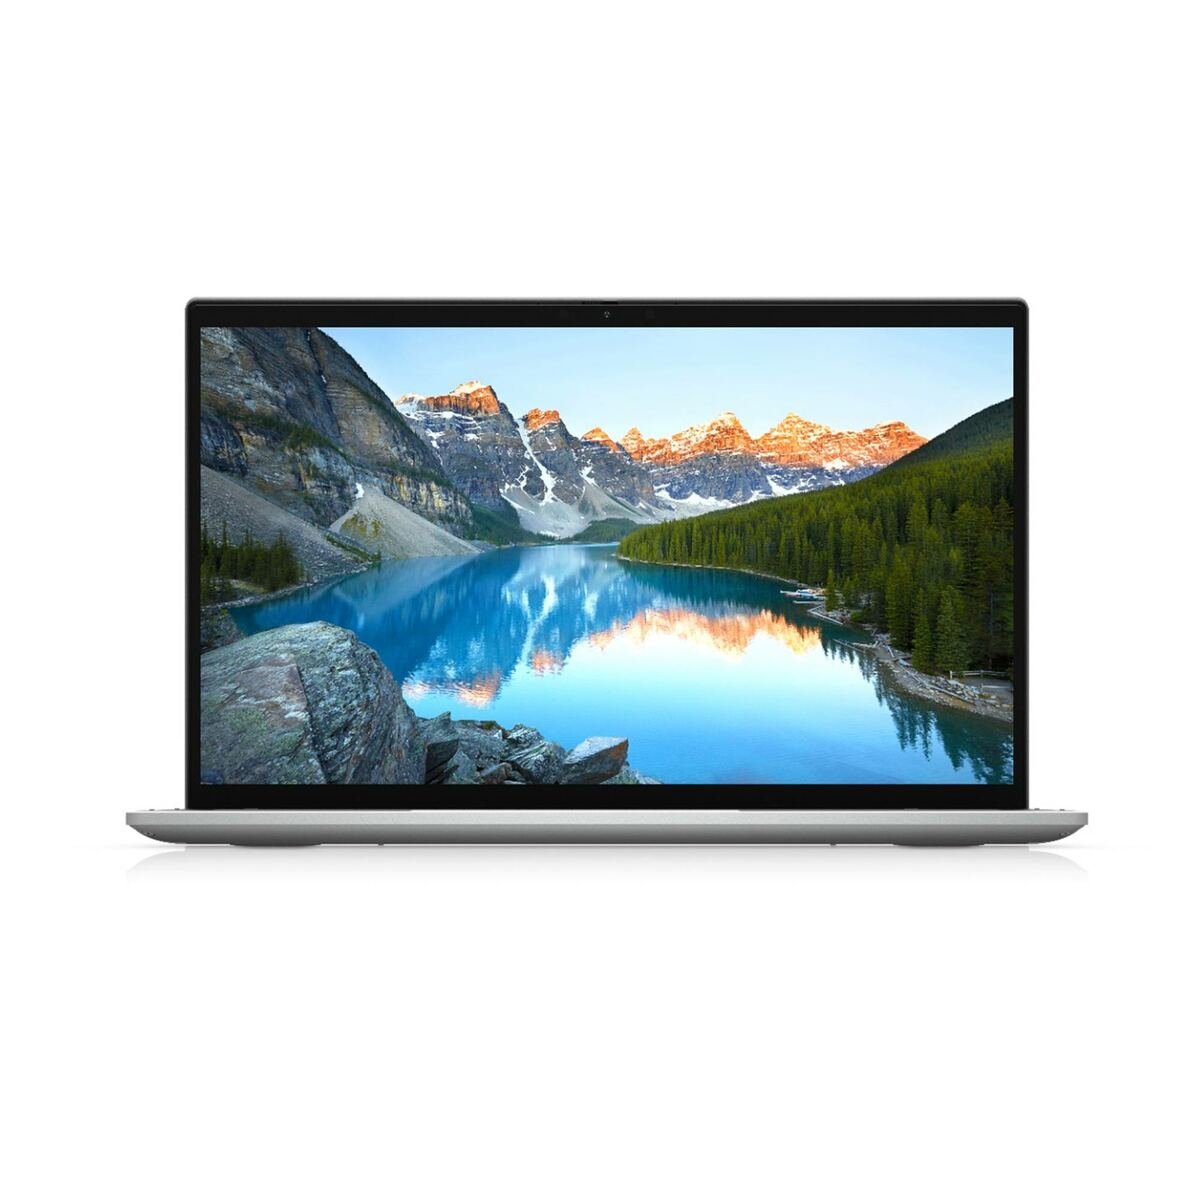 Dell Inspiron 13 (7306-INS-0201-SLV) 2in1 Laptop, Intel Core i7-1165G7, 16GB RAM, 1TB SSD, Intel Iris Xe Shared Graphics, 13.3" Full HD Touch Display, Windows 10, Silver